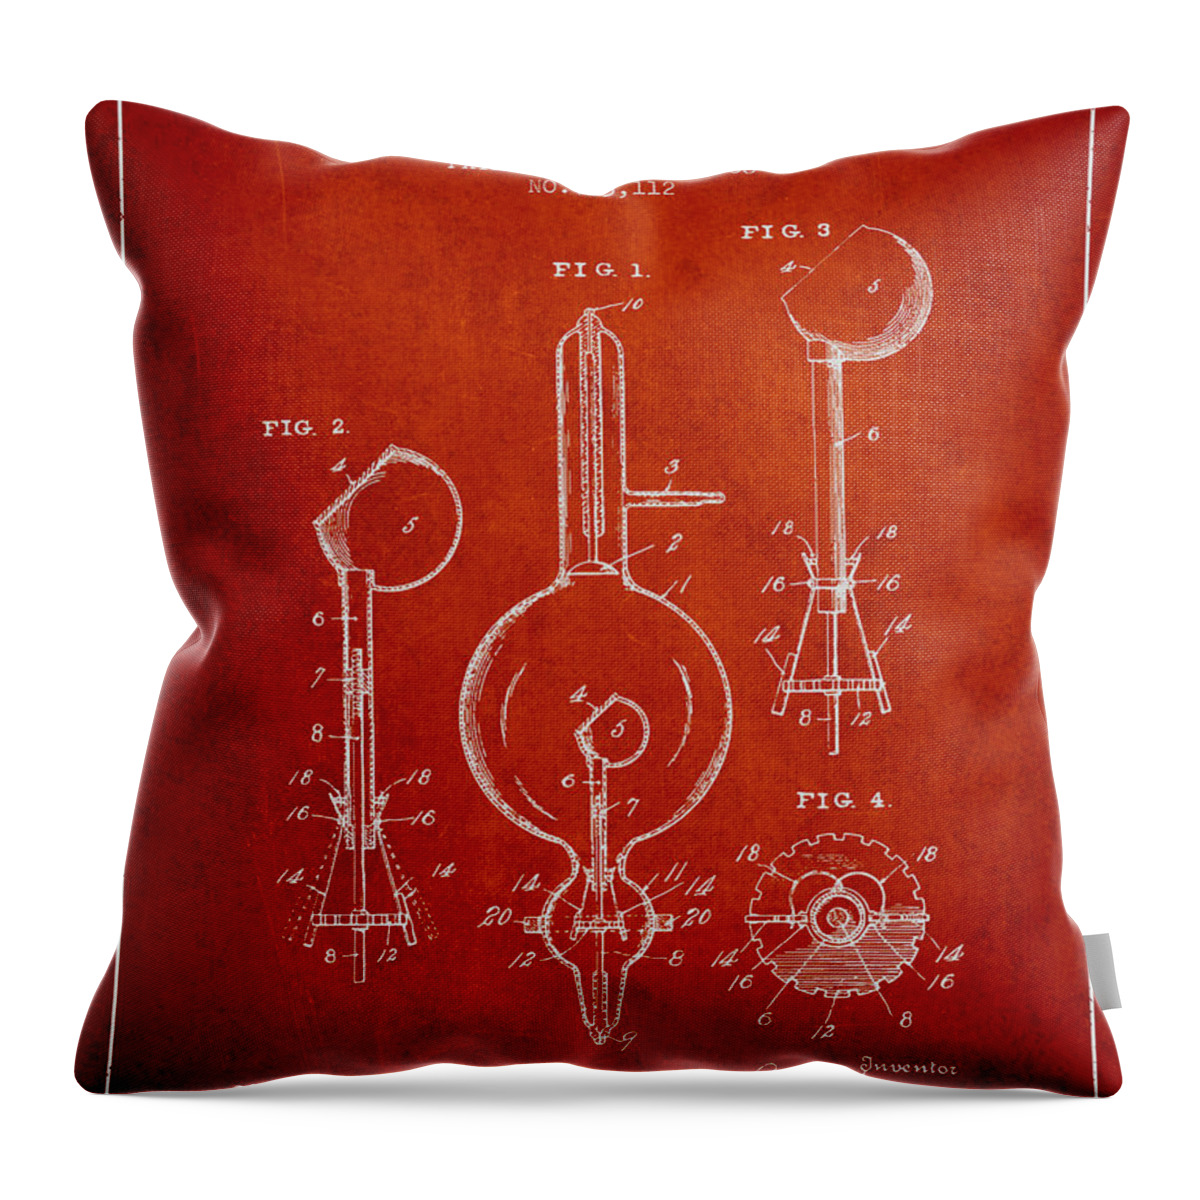 Electron Tube Throw Pillow featuring the digital art Vacuum Tube Patent From 1905 - Red by Aged Pixel